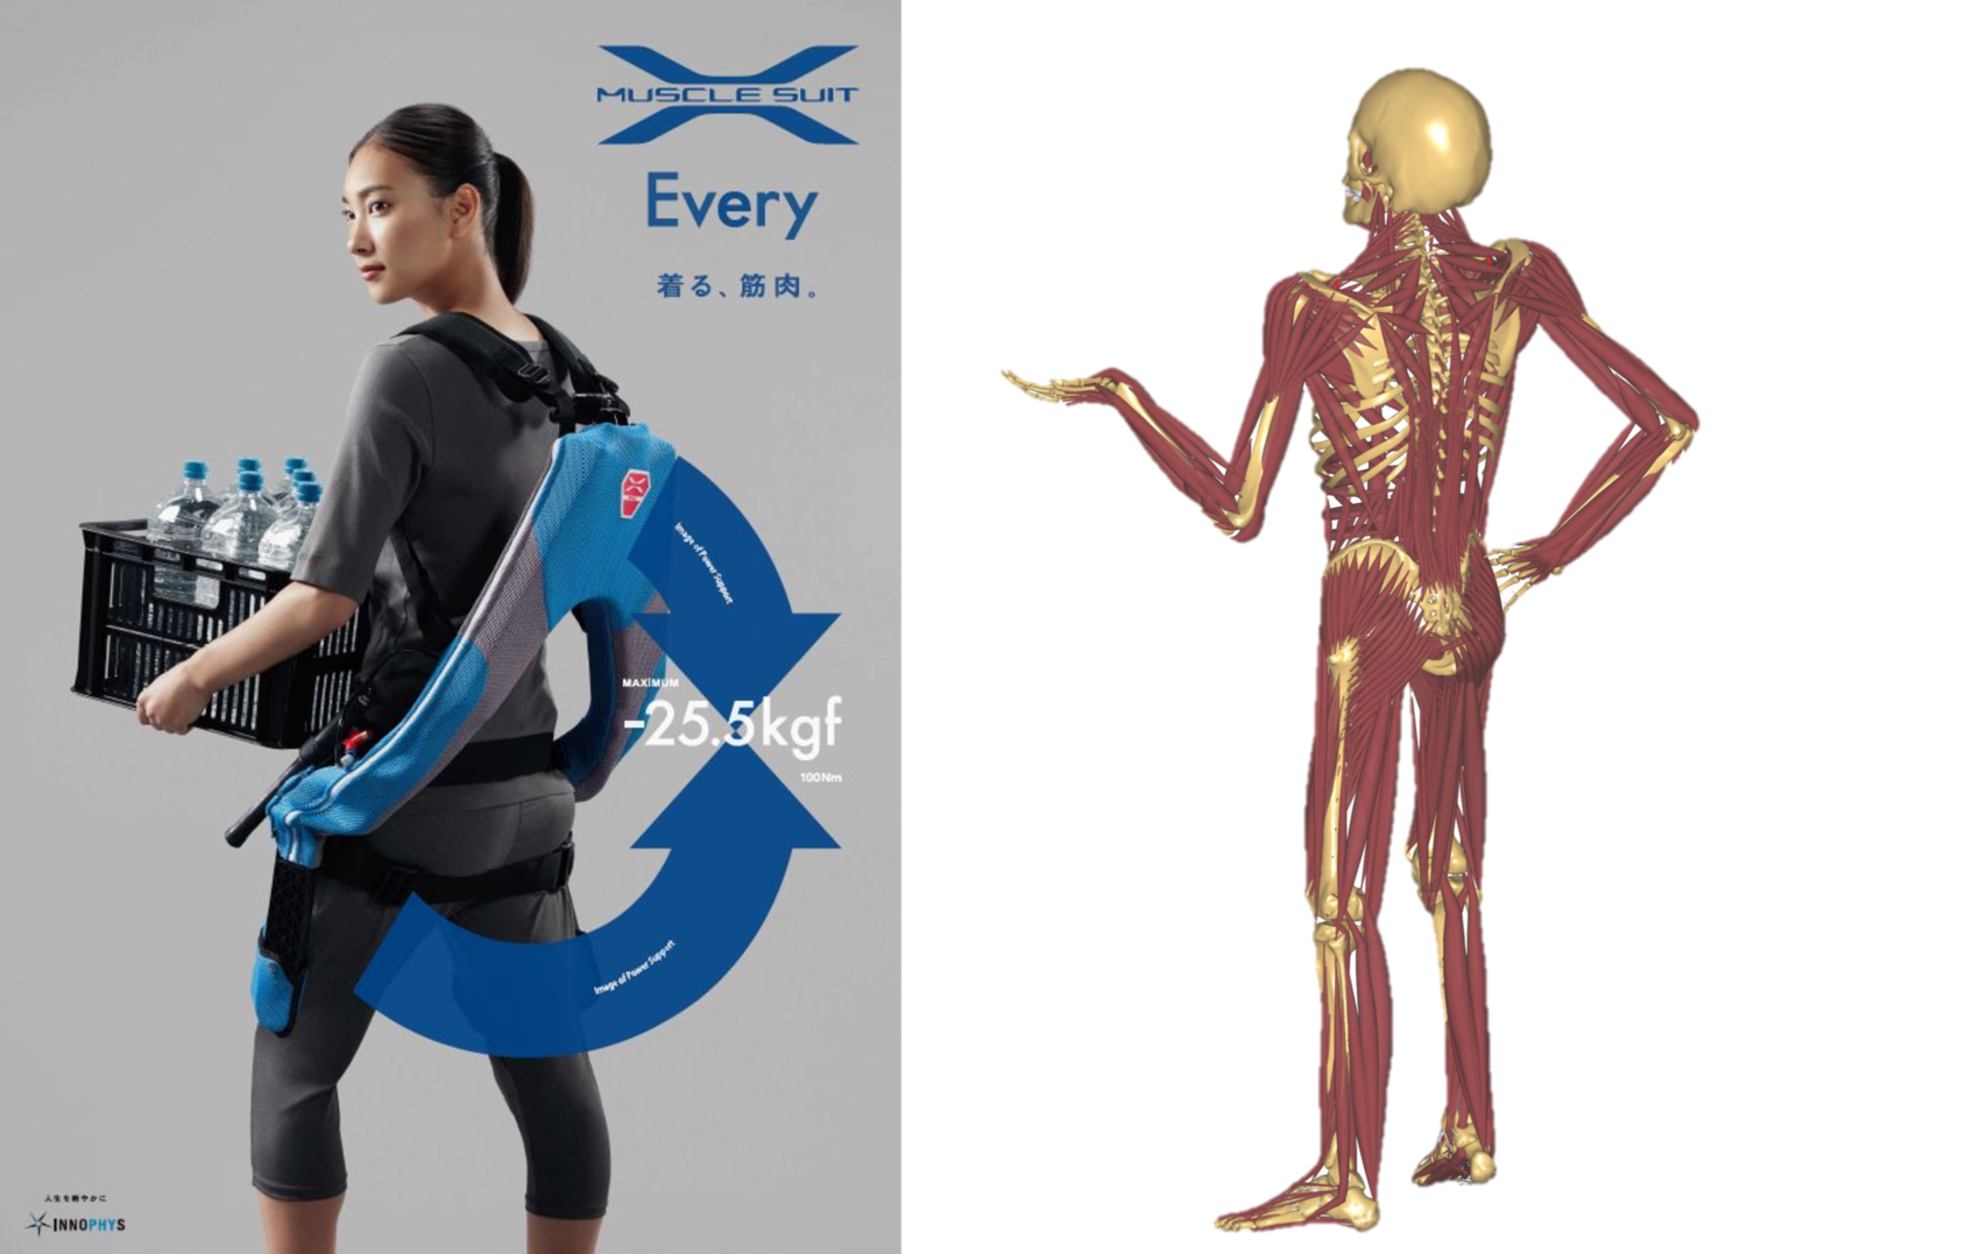 Introduction to Innophys and their wearable exoskeleton